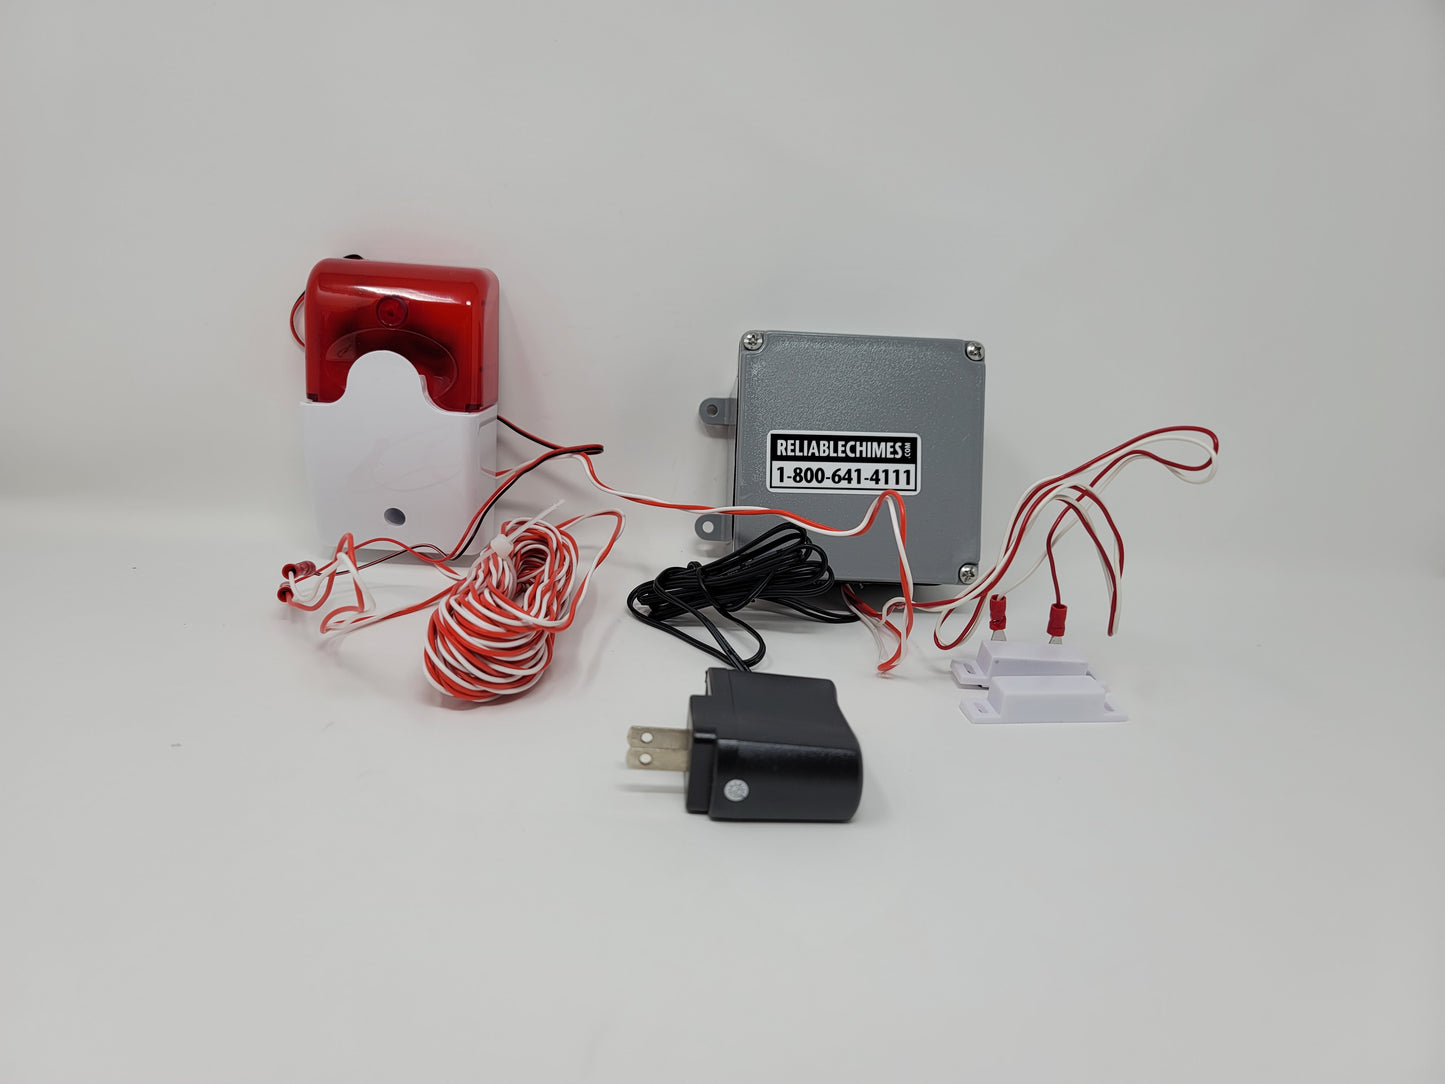 Commercial / Business Grade Magnetic Switch Kits - Reliable Chimes